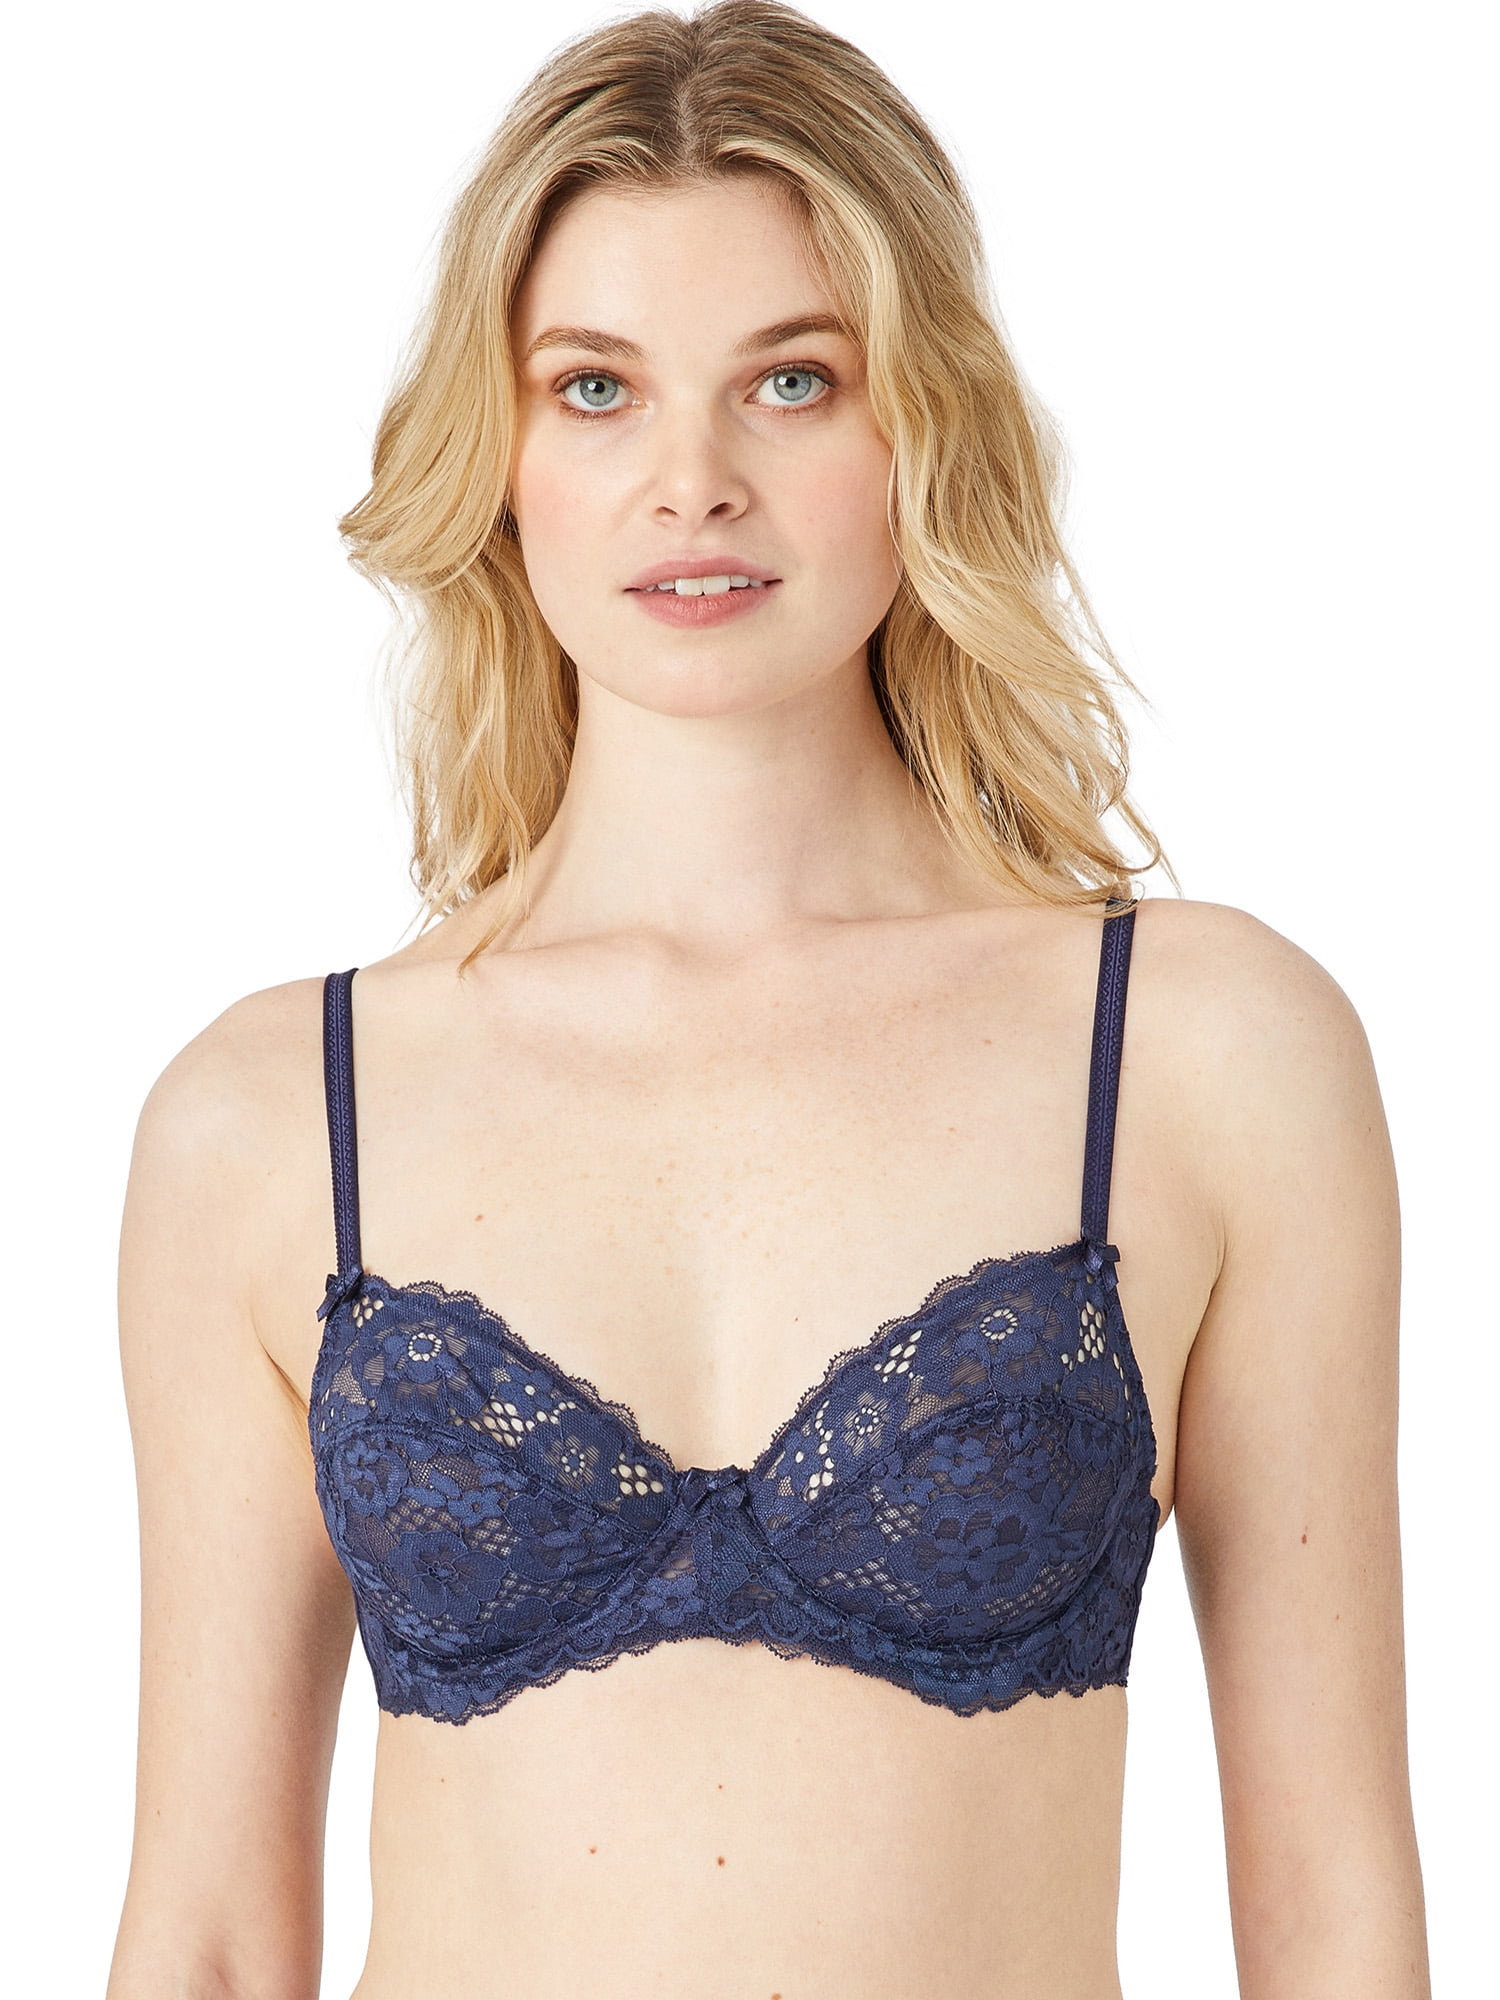 Adored by Adore Me Women's Unlined Underwire Chelsey Blue Lace Bra Size 34C  NEW